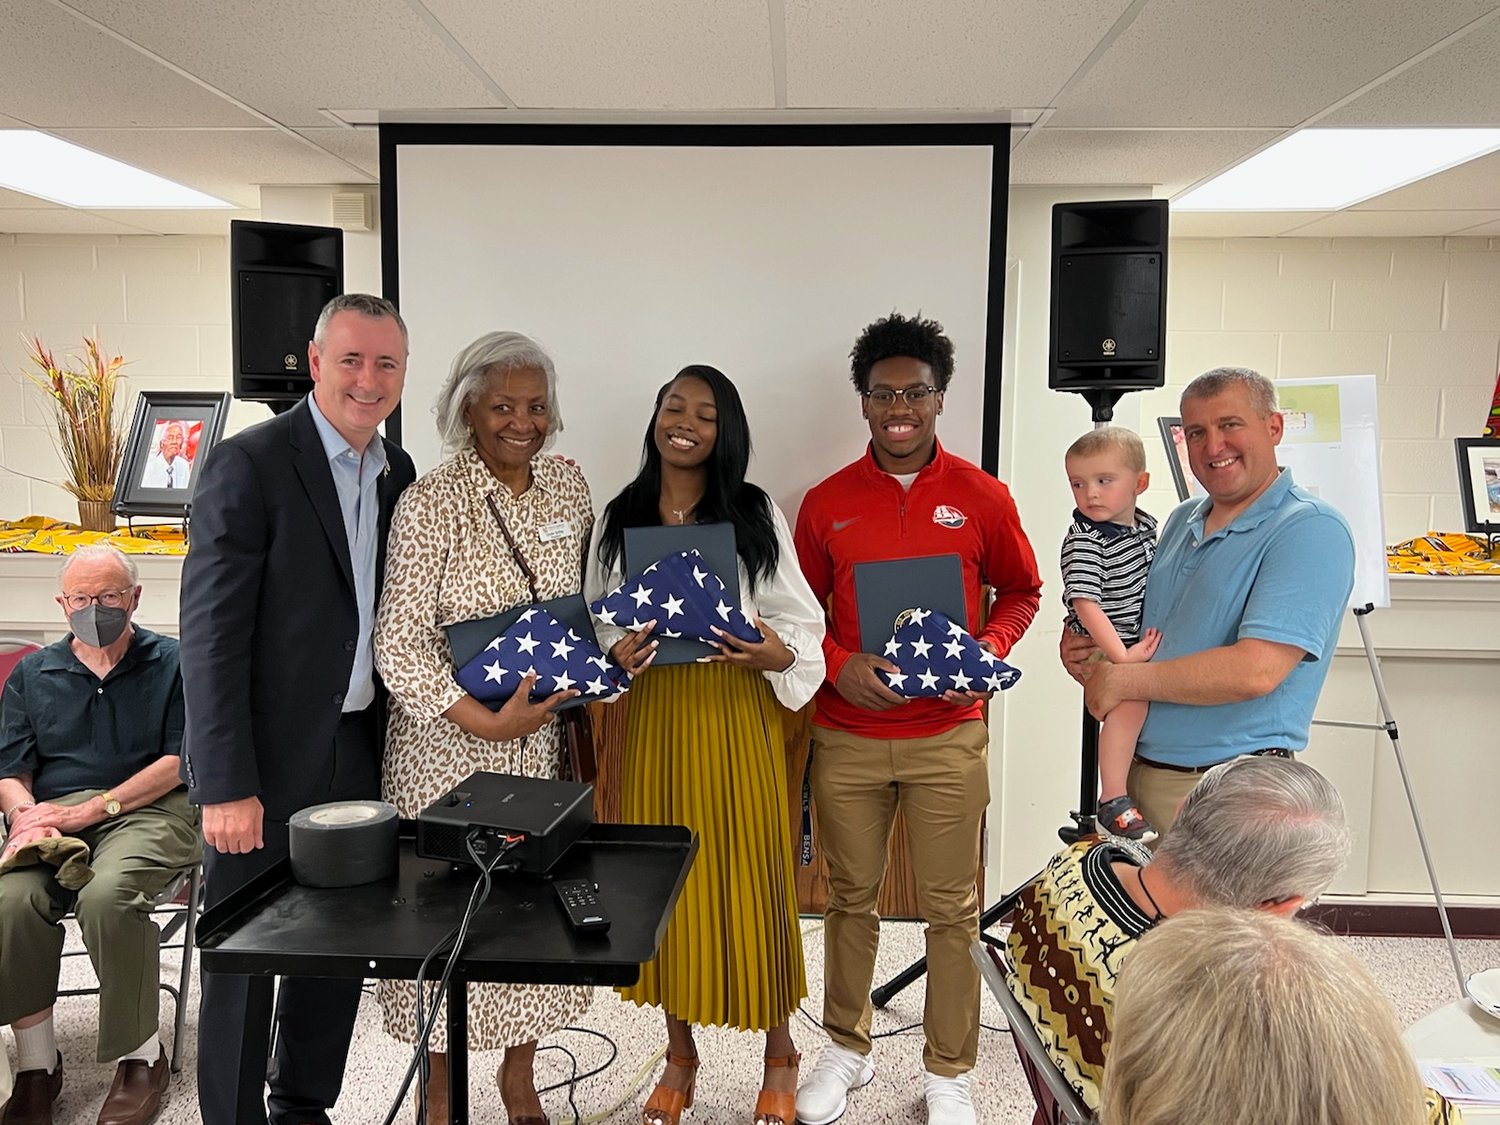 U.S. Rep. Brian Fitzpatrick, Linda Salley, scholarship winners Clarissa Gabriel and Josiah Leonard, and state Rep. Frank Farry with his grandson. Fitzpatrick said that he and Farry grew up in Middletown Township, where the new museum is located.